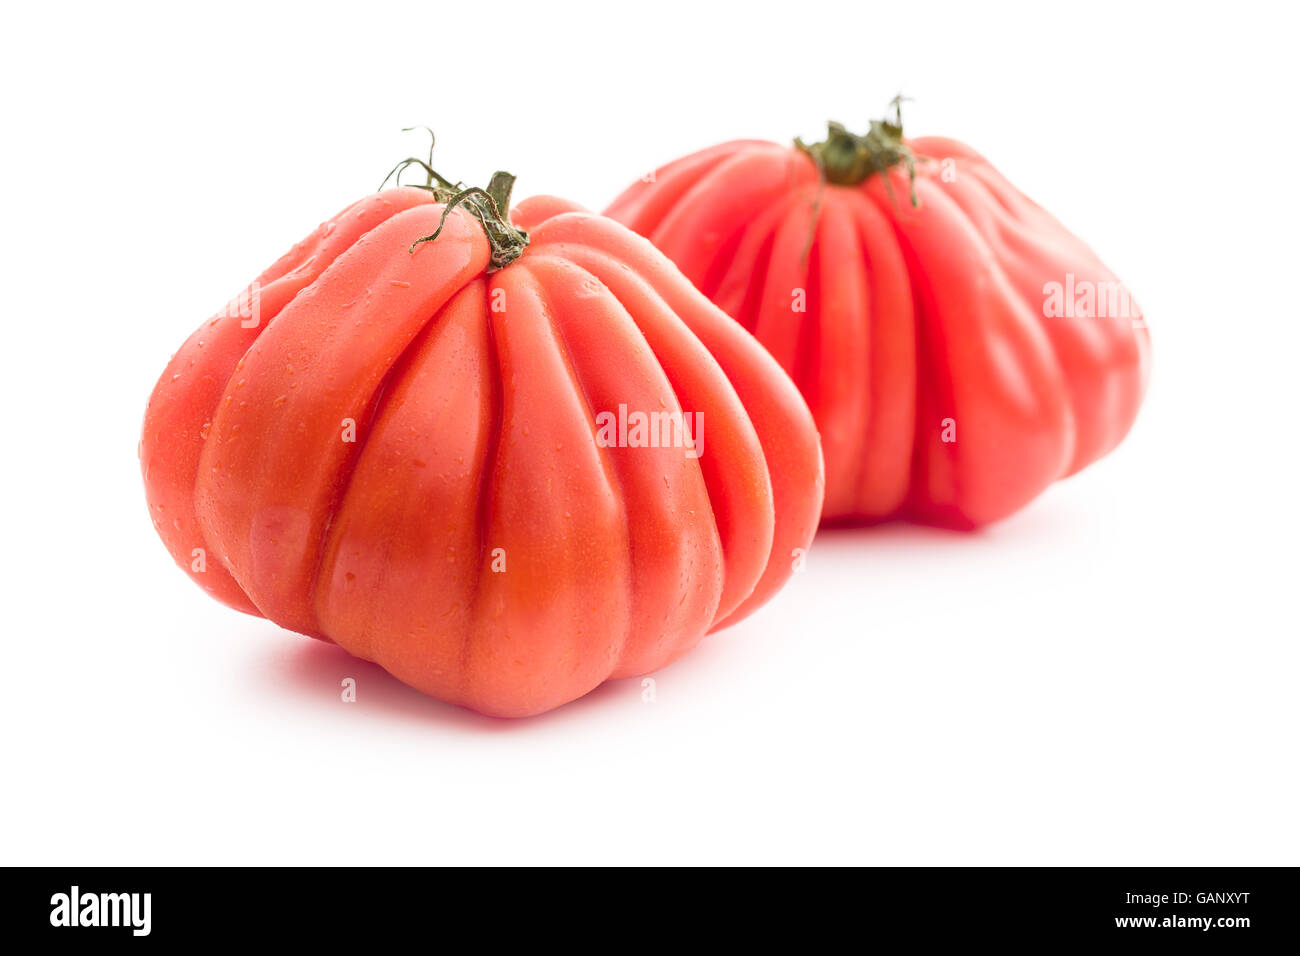 Coeur De Boeuf. Beefsteak tomatoes isolated on white background. Stock Photo